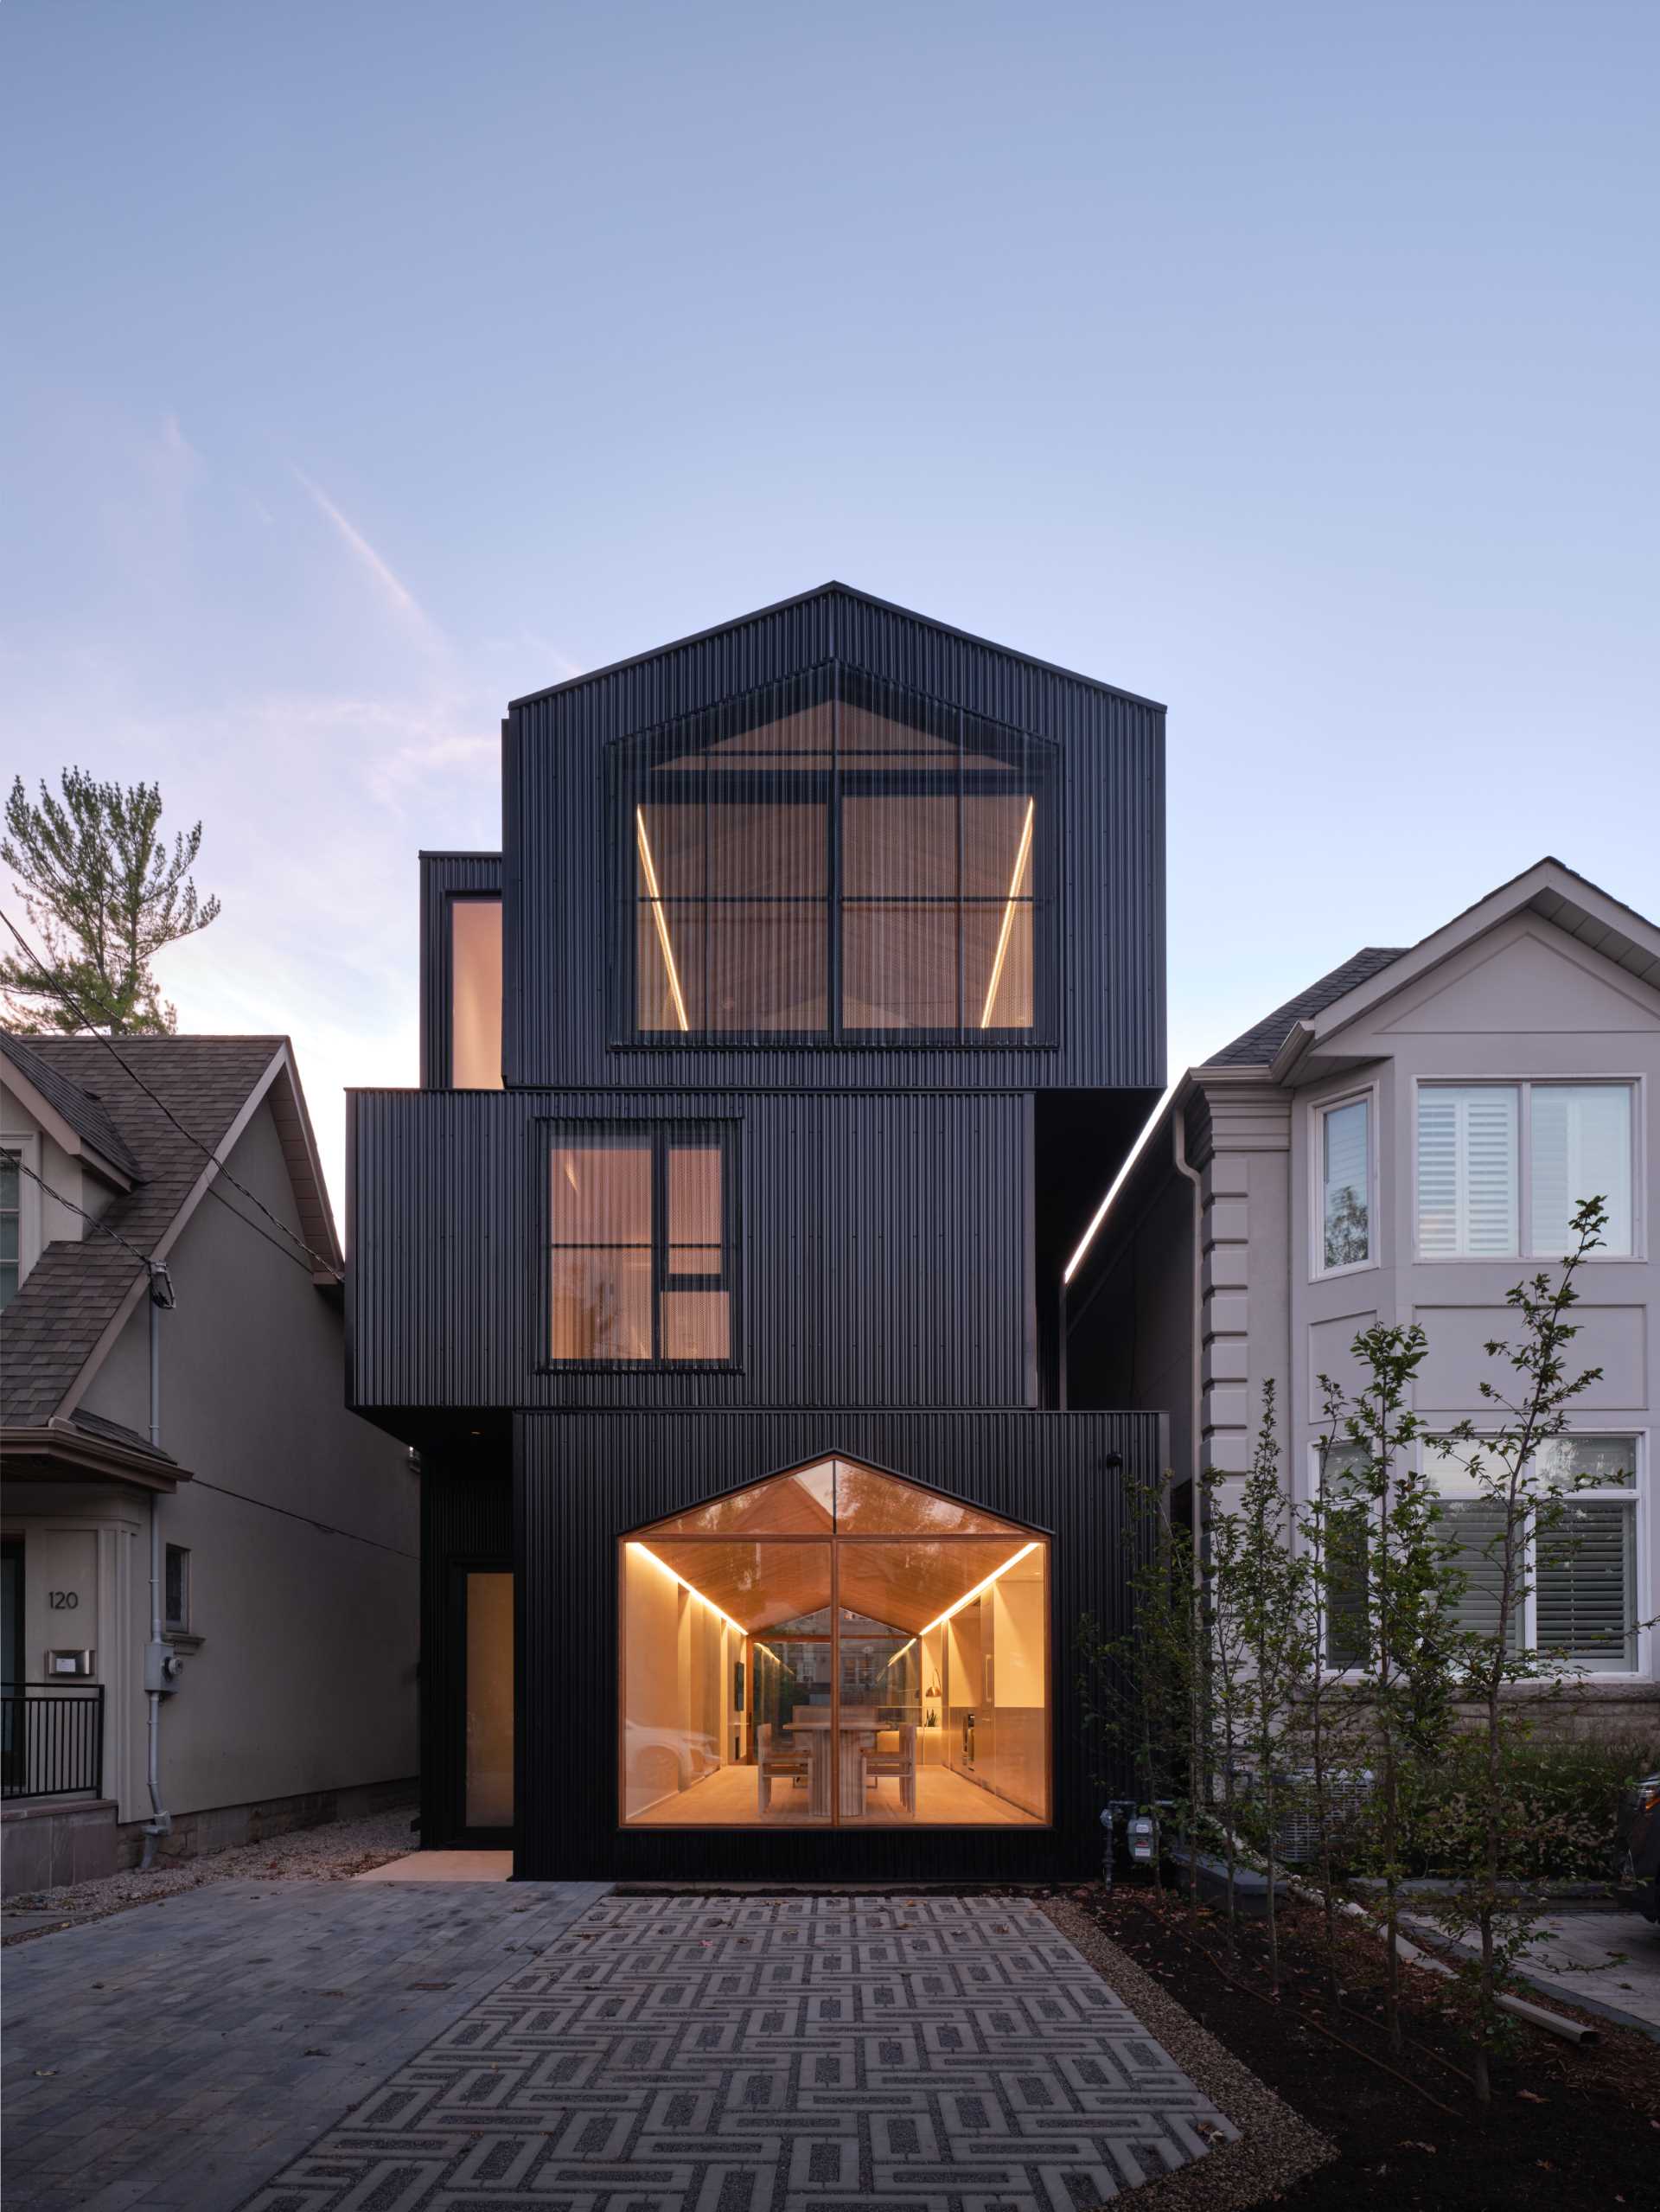 The home has a gable roof and appears as a series of stacked black boxes, with different levels defining the various areas of the home.